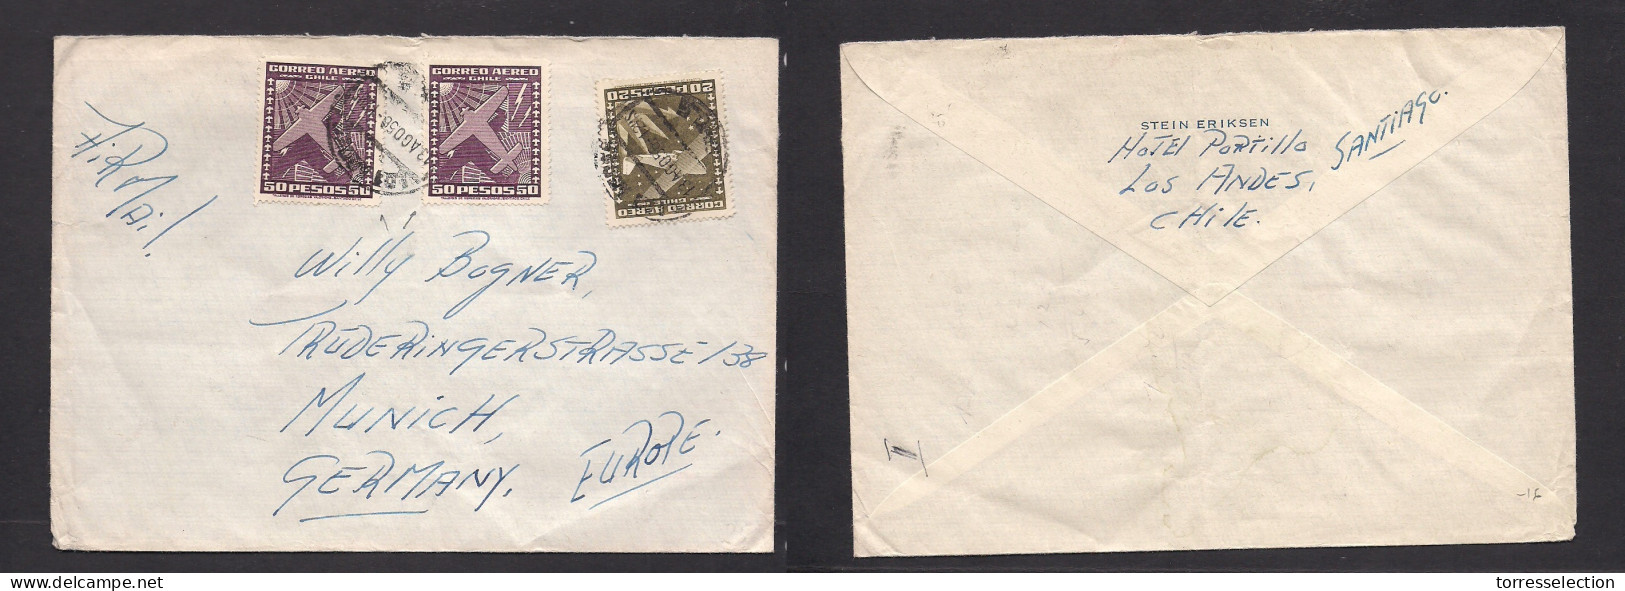 Chile - XX. 1956 (13 Aug) Los Andes - Germany, Munich. Air Multifkd Env At 120 Pesos Rate. XSALE. - Chili